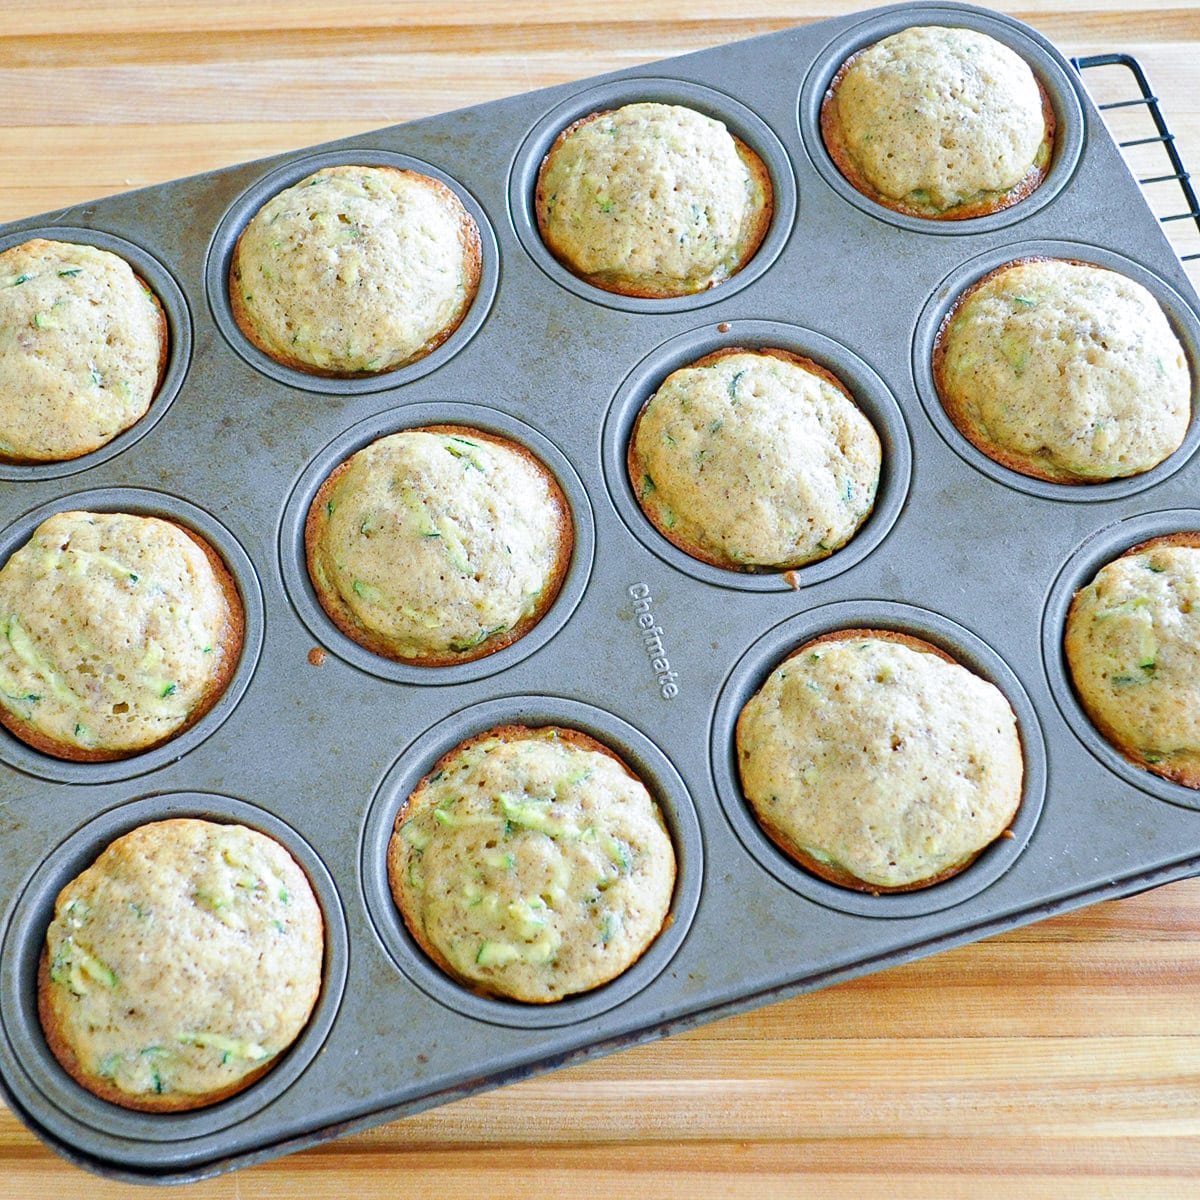 Just baked zucchini muffins still in the baking pan. 